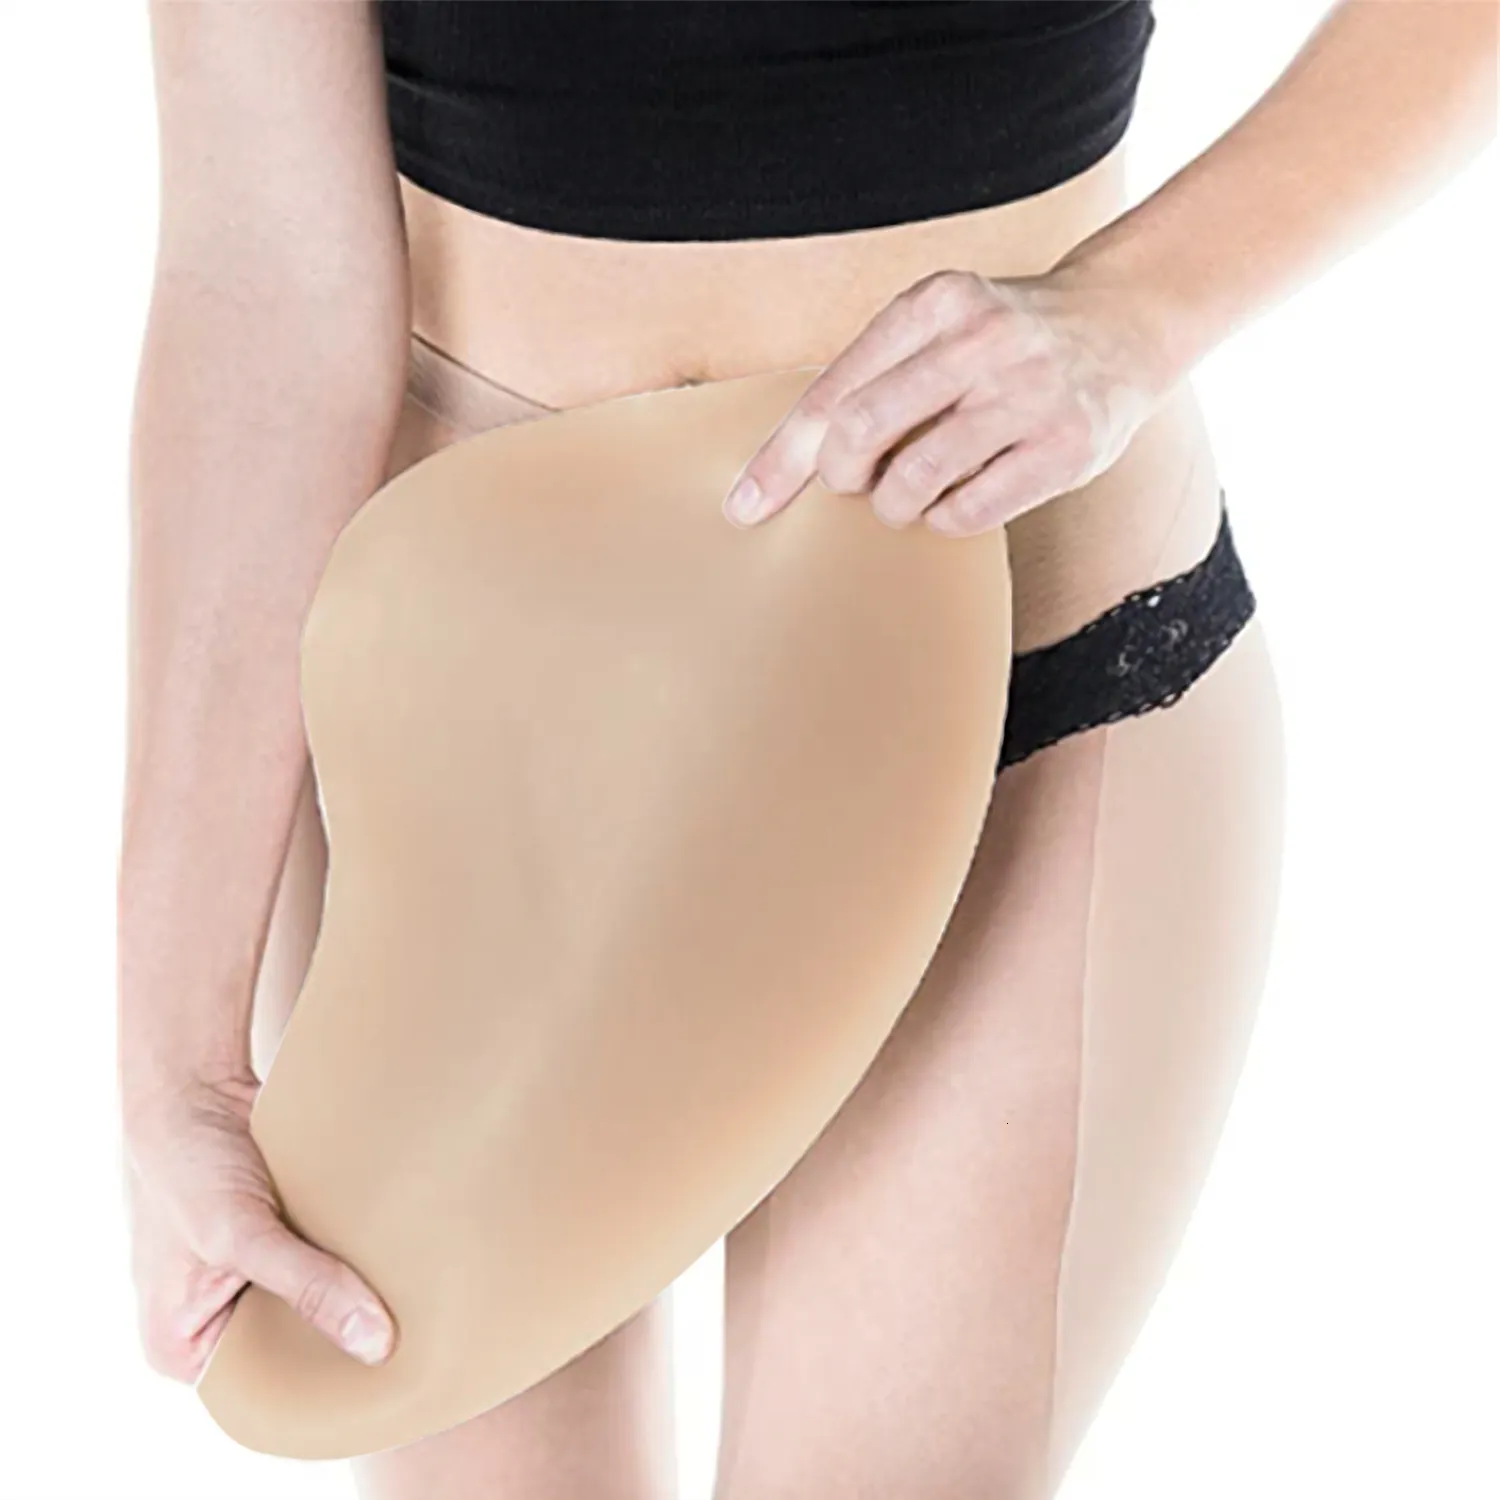 Liifun Silicone Breast Form Inserts For Butt And Thigh Shaping